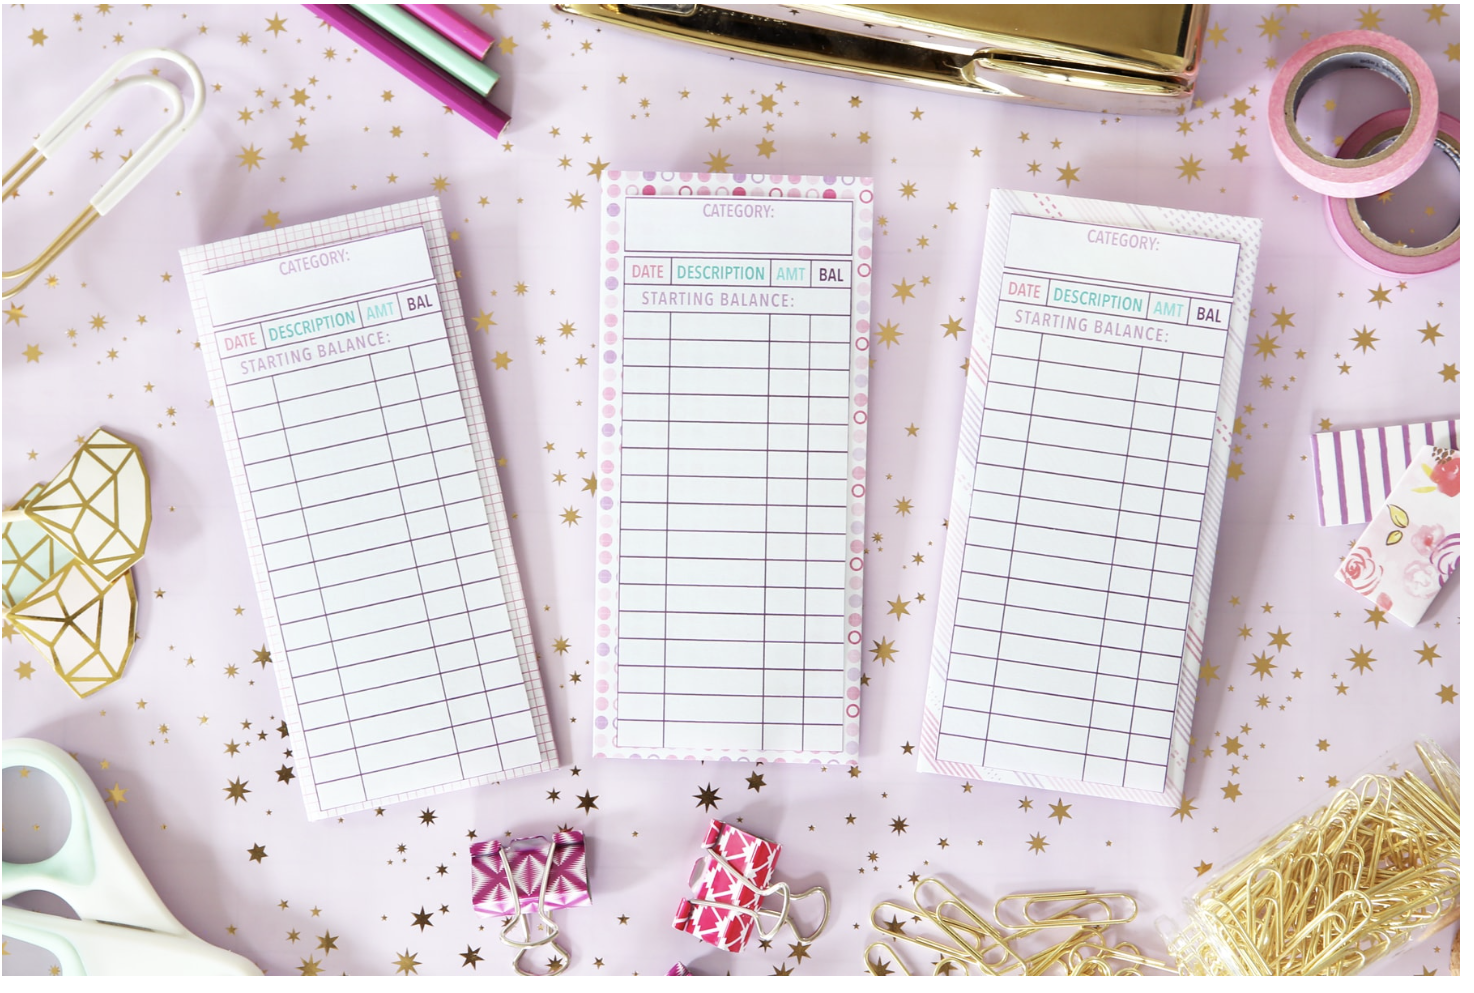 pink and white vertical envelopes with columns and rows to record data, on pink starry flatlay